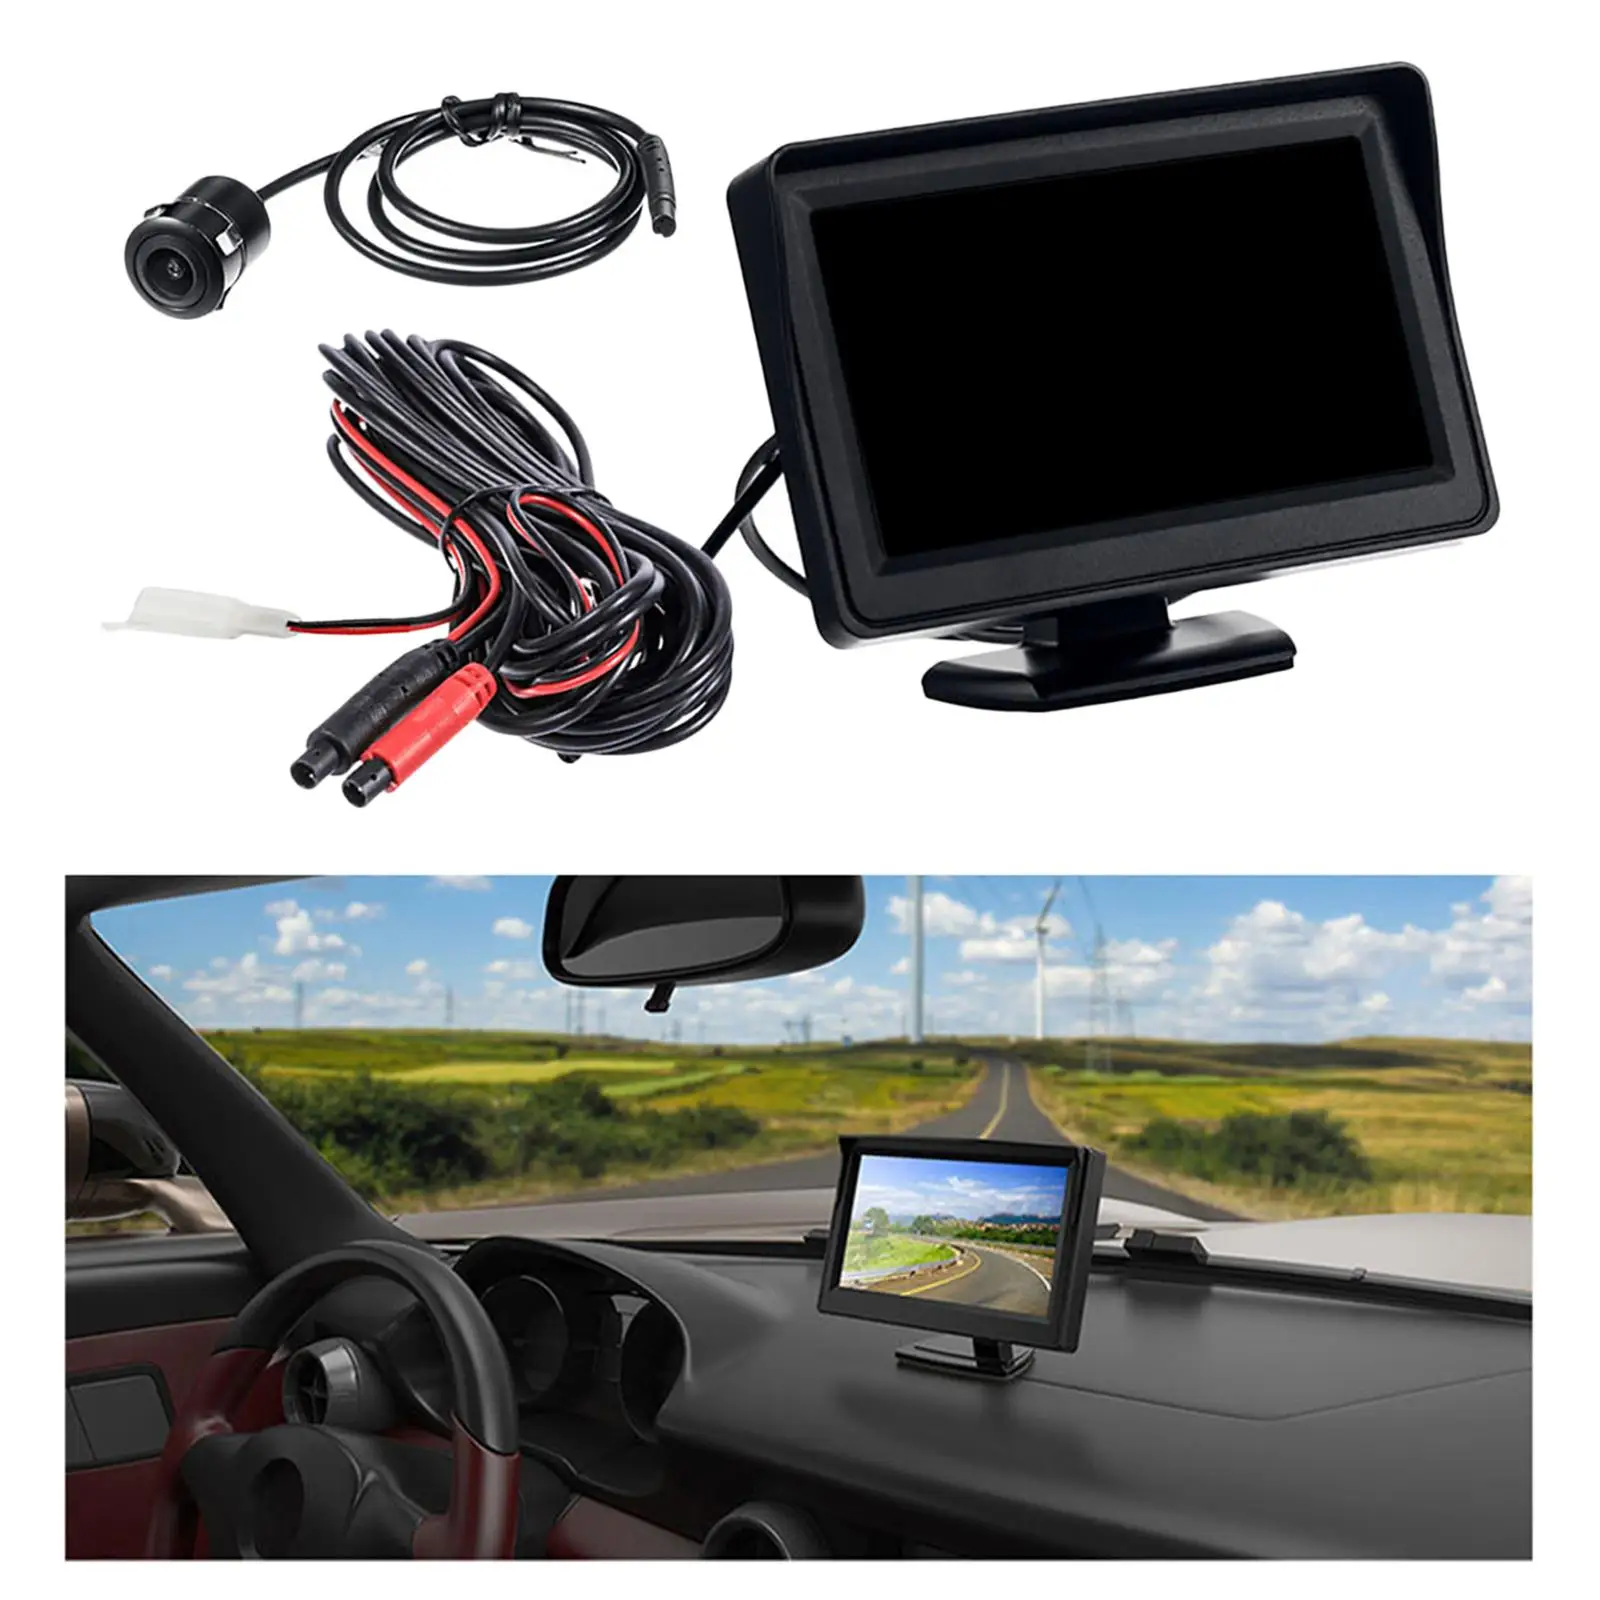 5 Inch Rear View Camera Screen Display Backup Color Reverse Assistance Parking Car Monitor